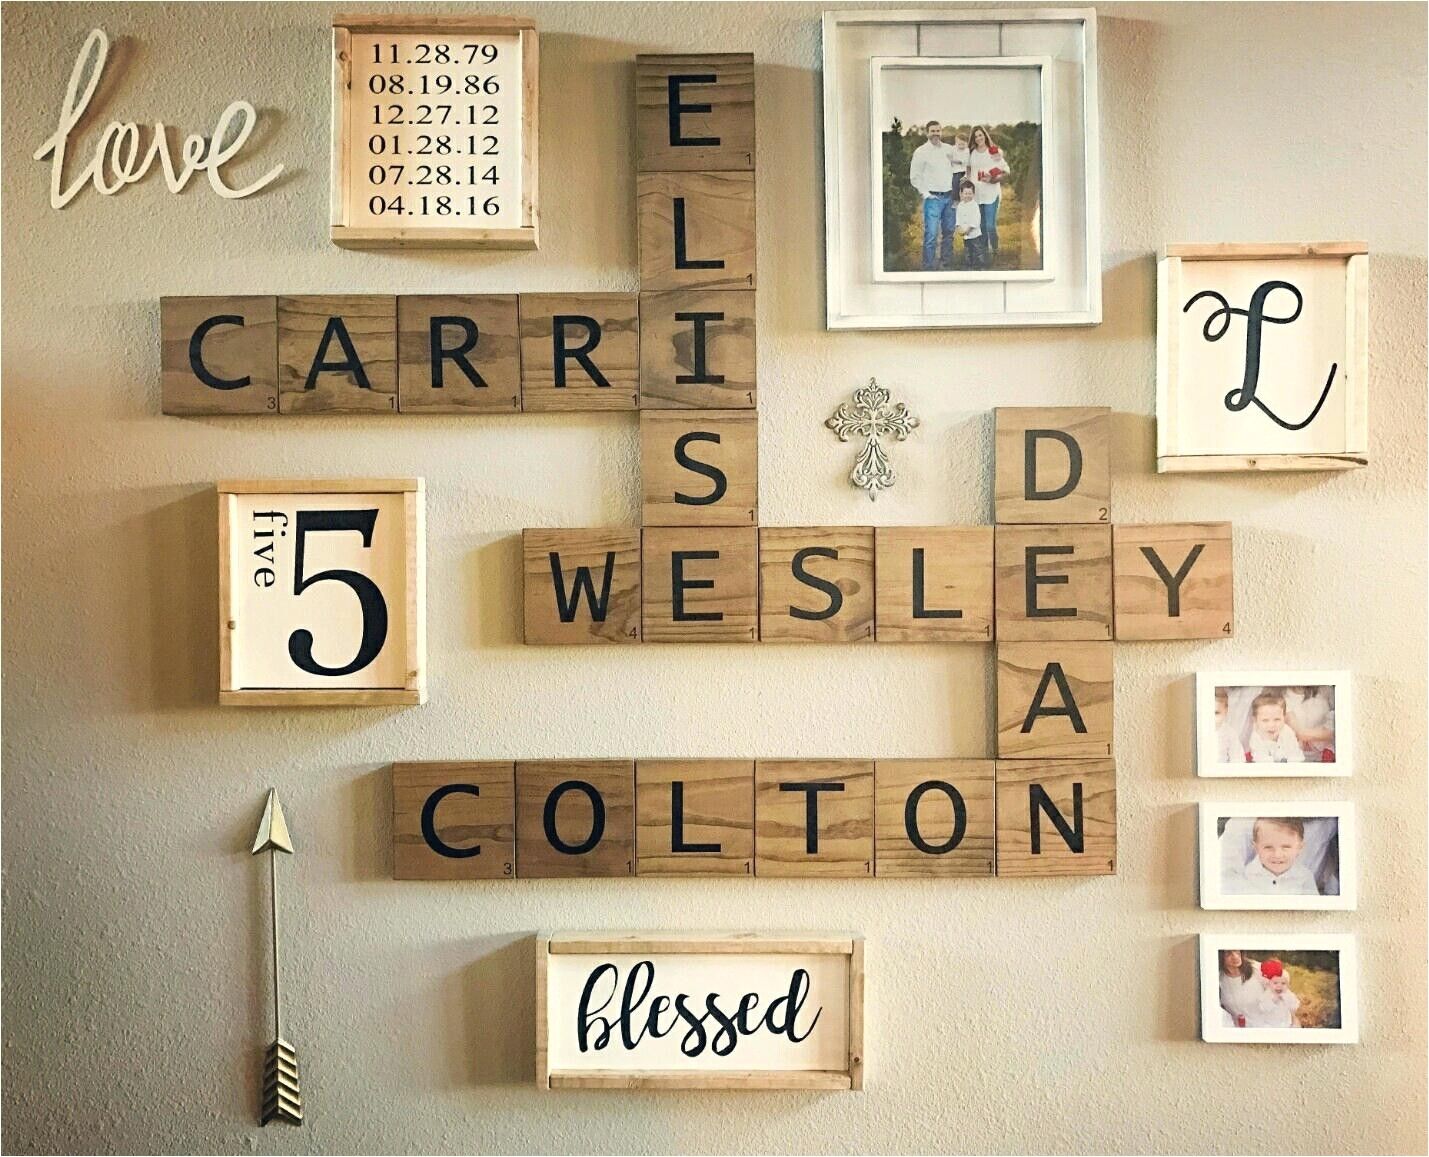 Large Free Standing Letters For Decorating Wall Decor Metal Letter Intended For Letter Wall Art (View 15 of 20)